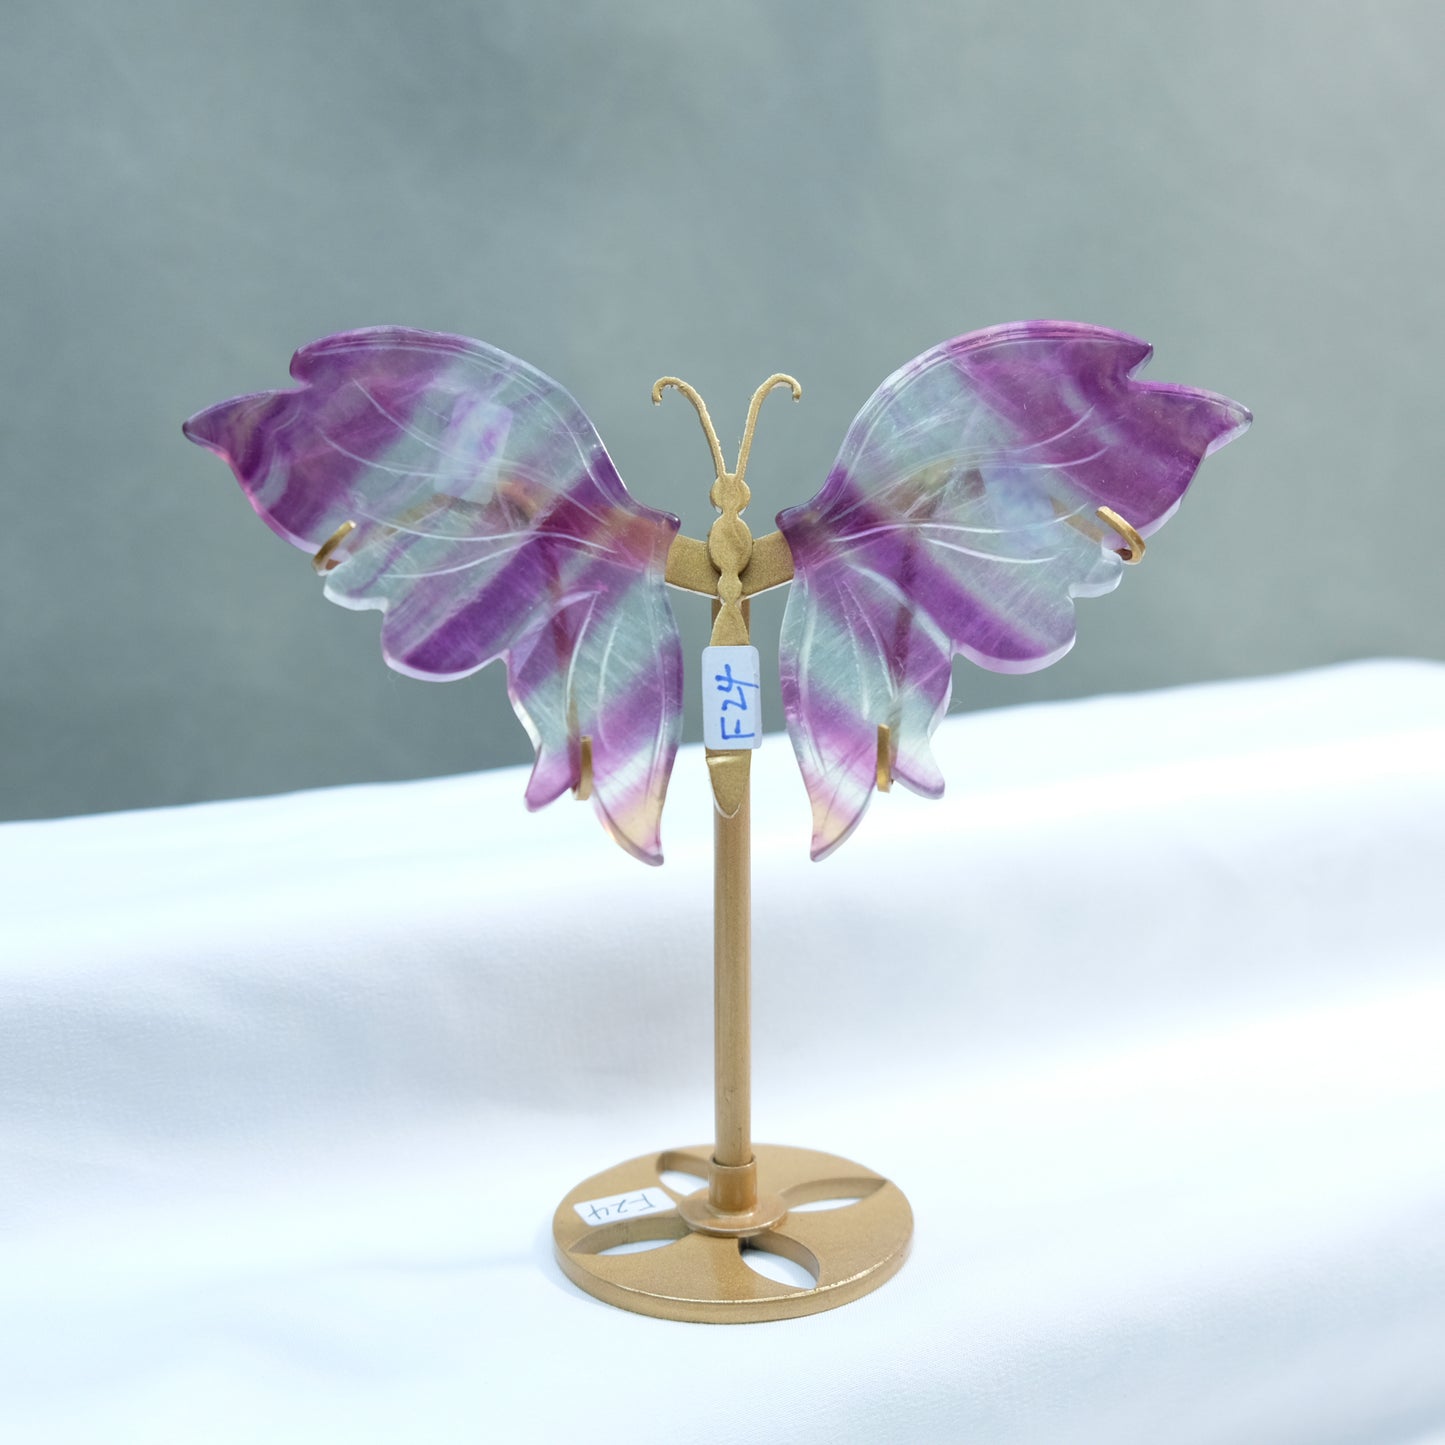 [Wholesale Price]Exquisite Candy Fluorite Pink Fluorite Crystal Butterfly Wings One of A Kind Pieces